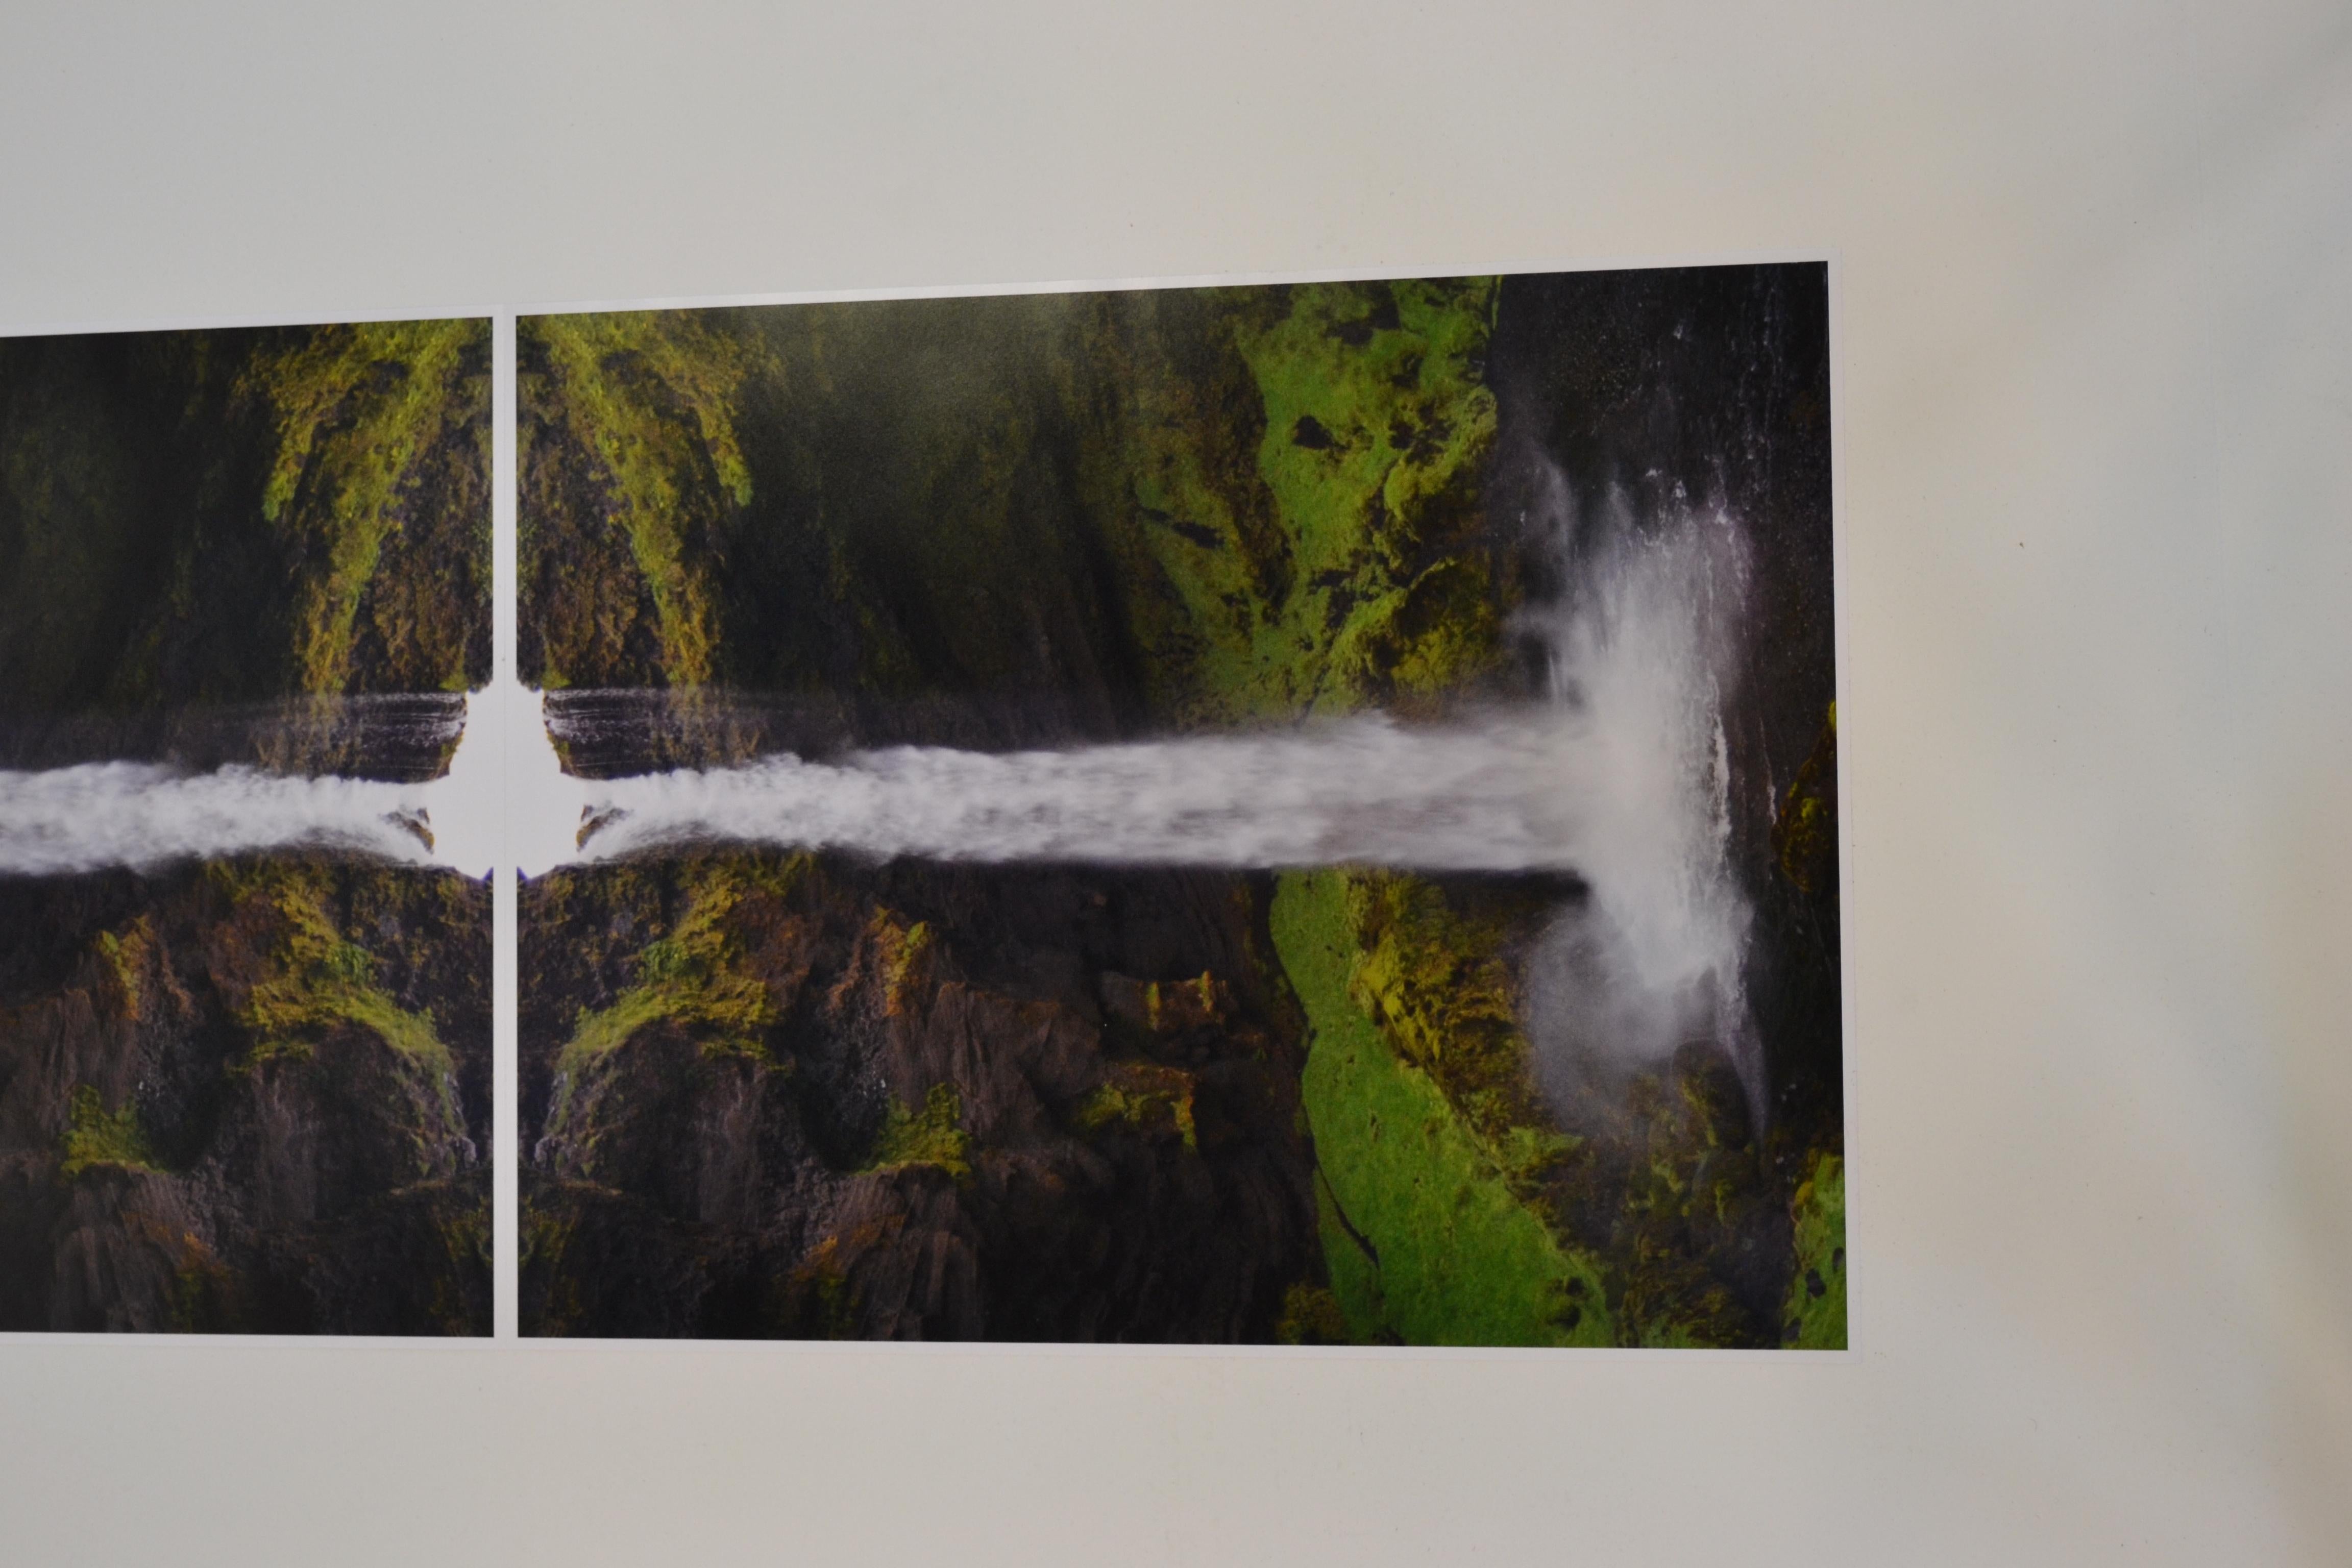 Contact is content at Seljalandsfoss, Contemporary, 21st Century, C Print For Sale 7